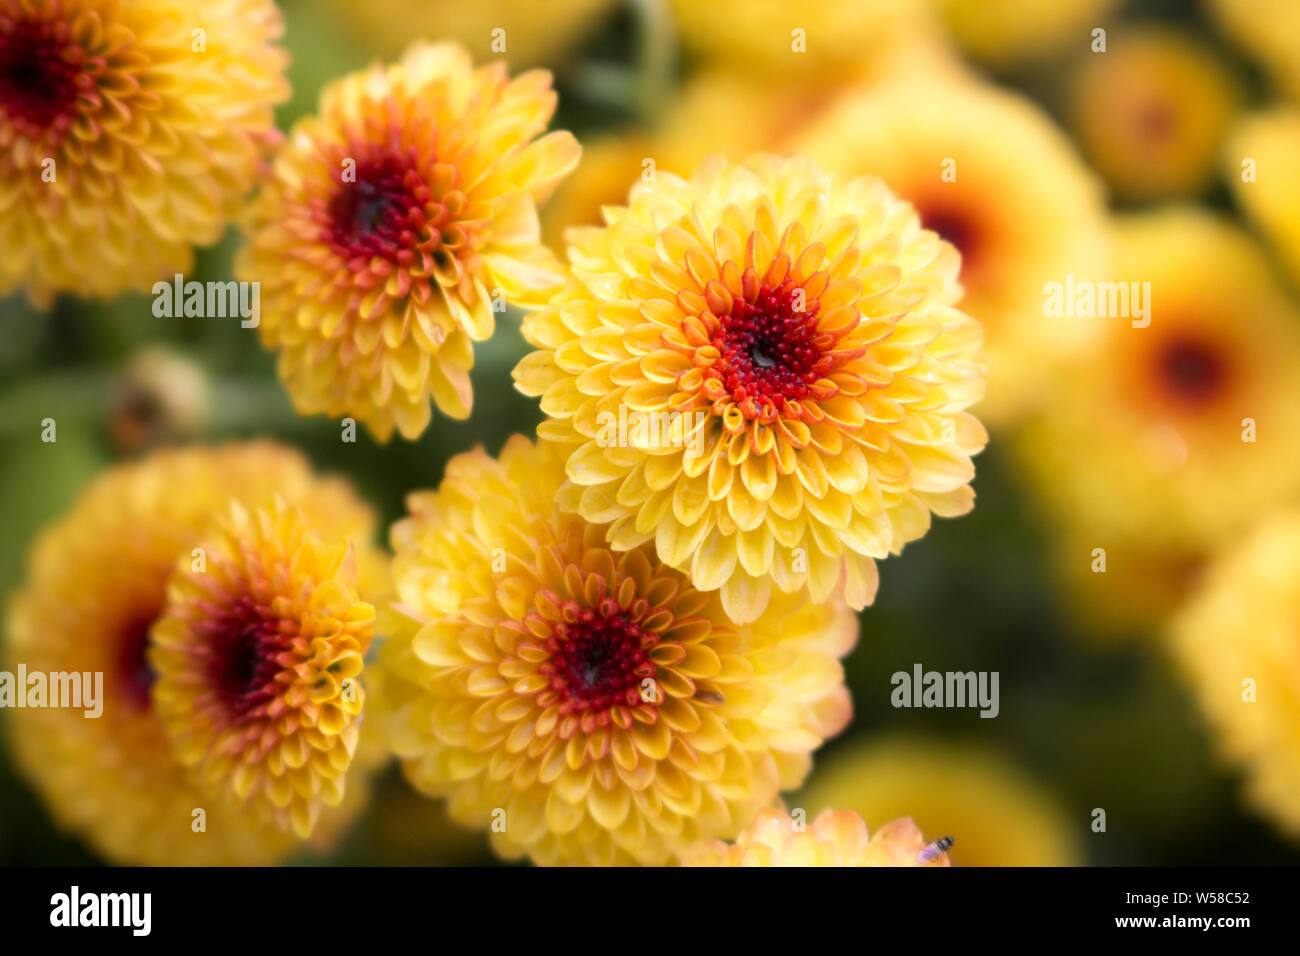 Lollipop Yellow Chrysanthemum blossoms in full bloom with water drops in center from morning dew. Blurry background. Stock Photo